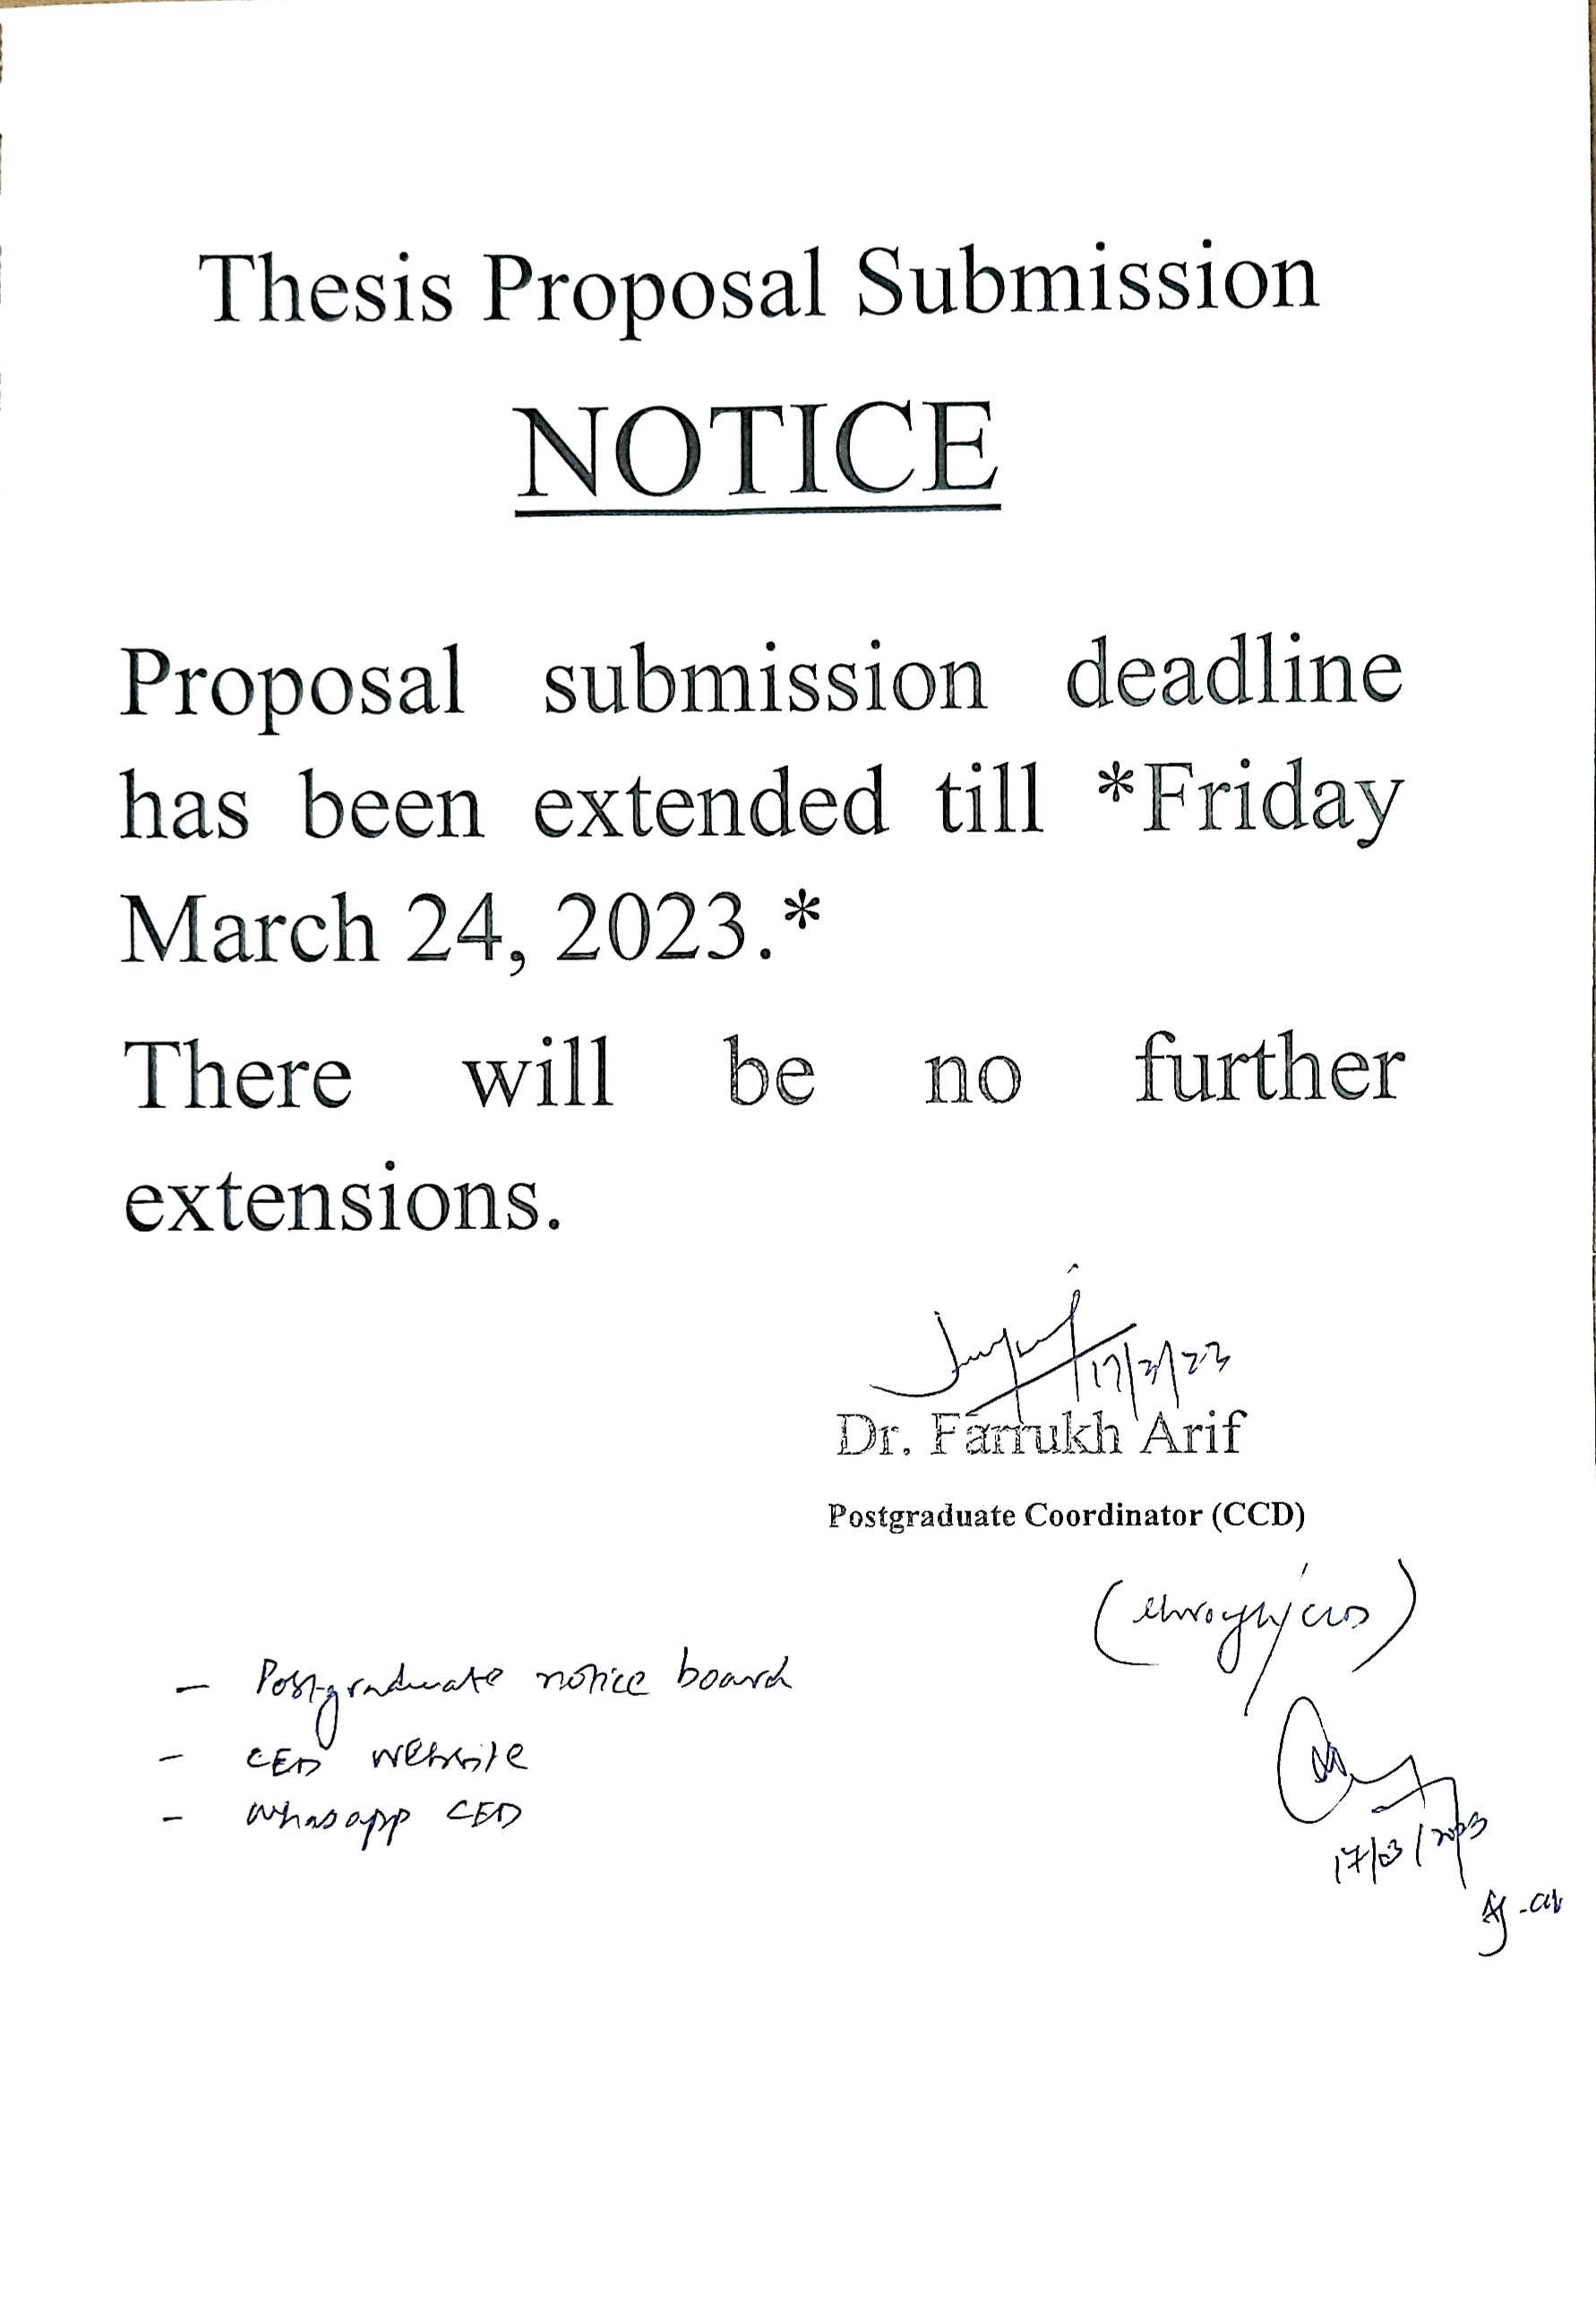 extension of thesis proposal